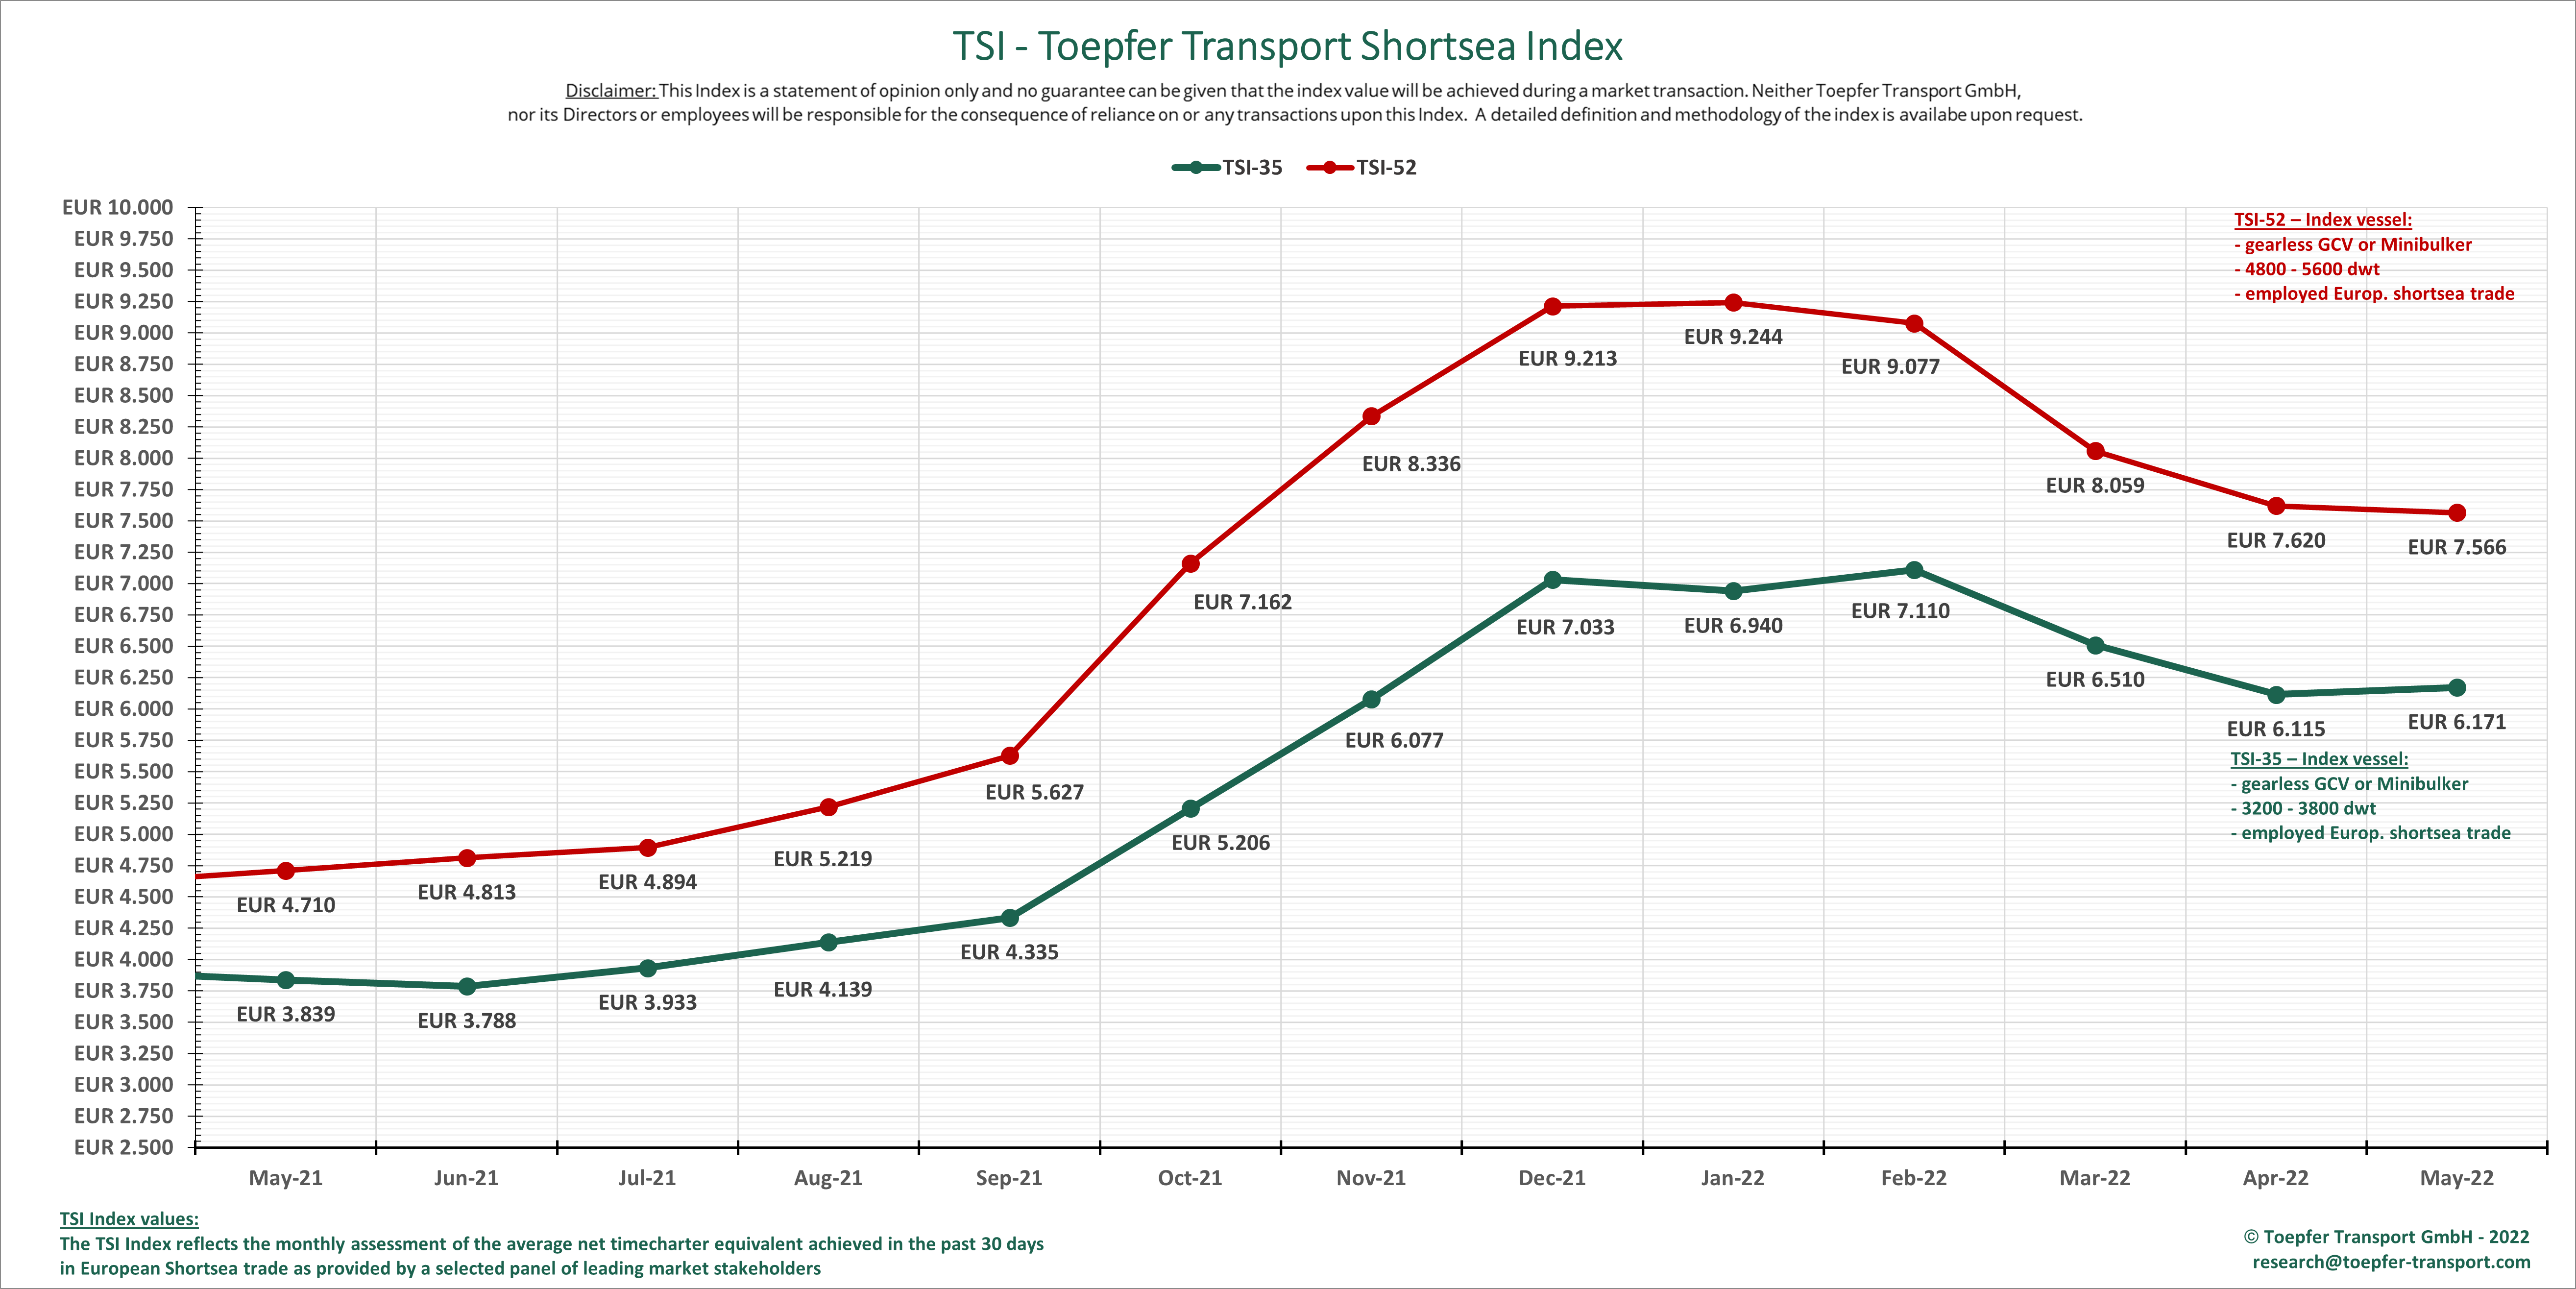 Toepfer Transport: short sea charter rates remain flat in May